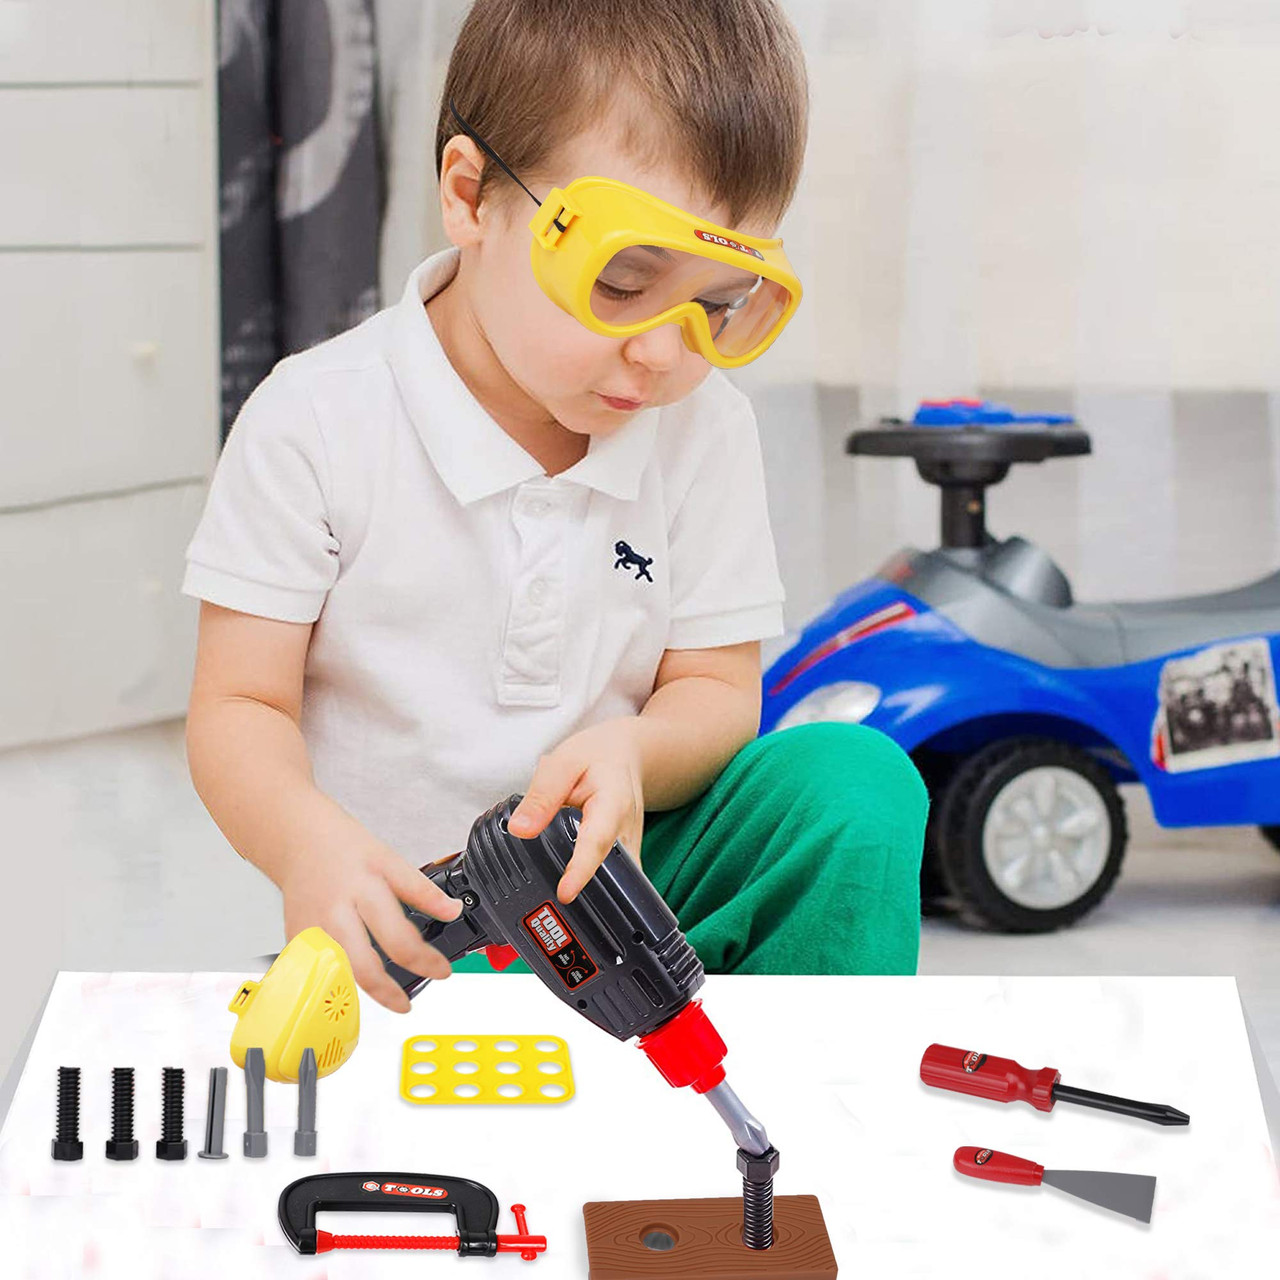 Children's Tool Set Toy Drill Kids Power Construction Toy Pretend Play Toy  Tools Kit for Toddler Boys Girls Child Black Decker - AliExpress